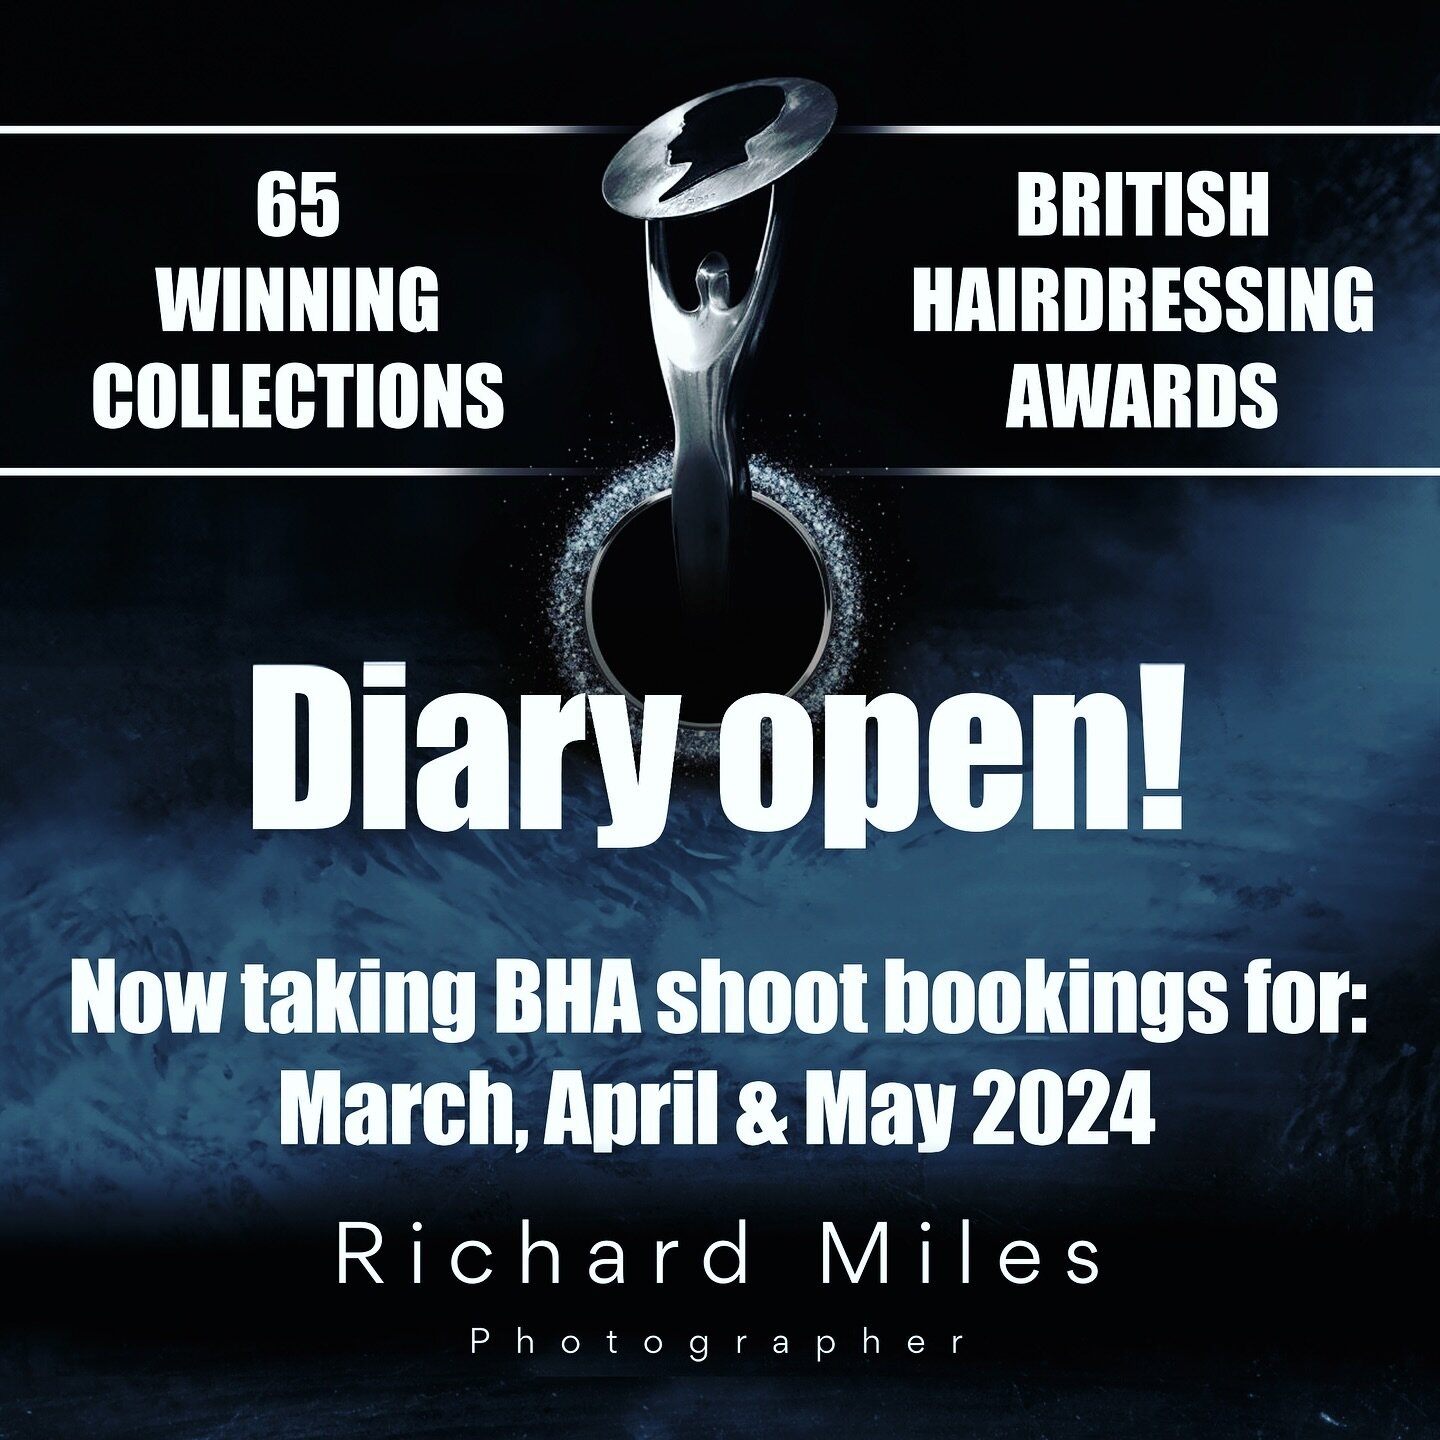 The diary has opened for the 2024 British Hairdressing Awards! Richard will be taking bookings to shoot BHA collections during March, April and May 2024. 

Looking to create some photographic magic this year? Don&rsquo;t let this opportunity slide by